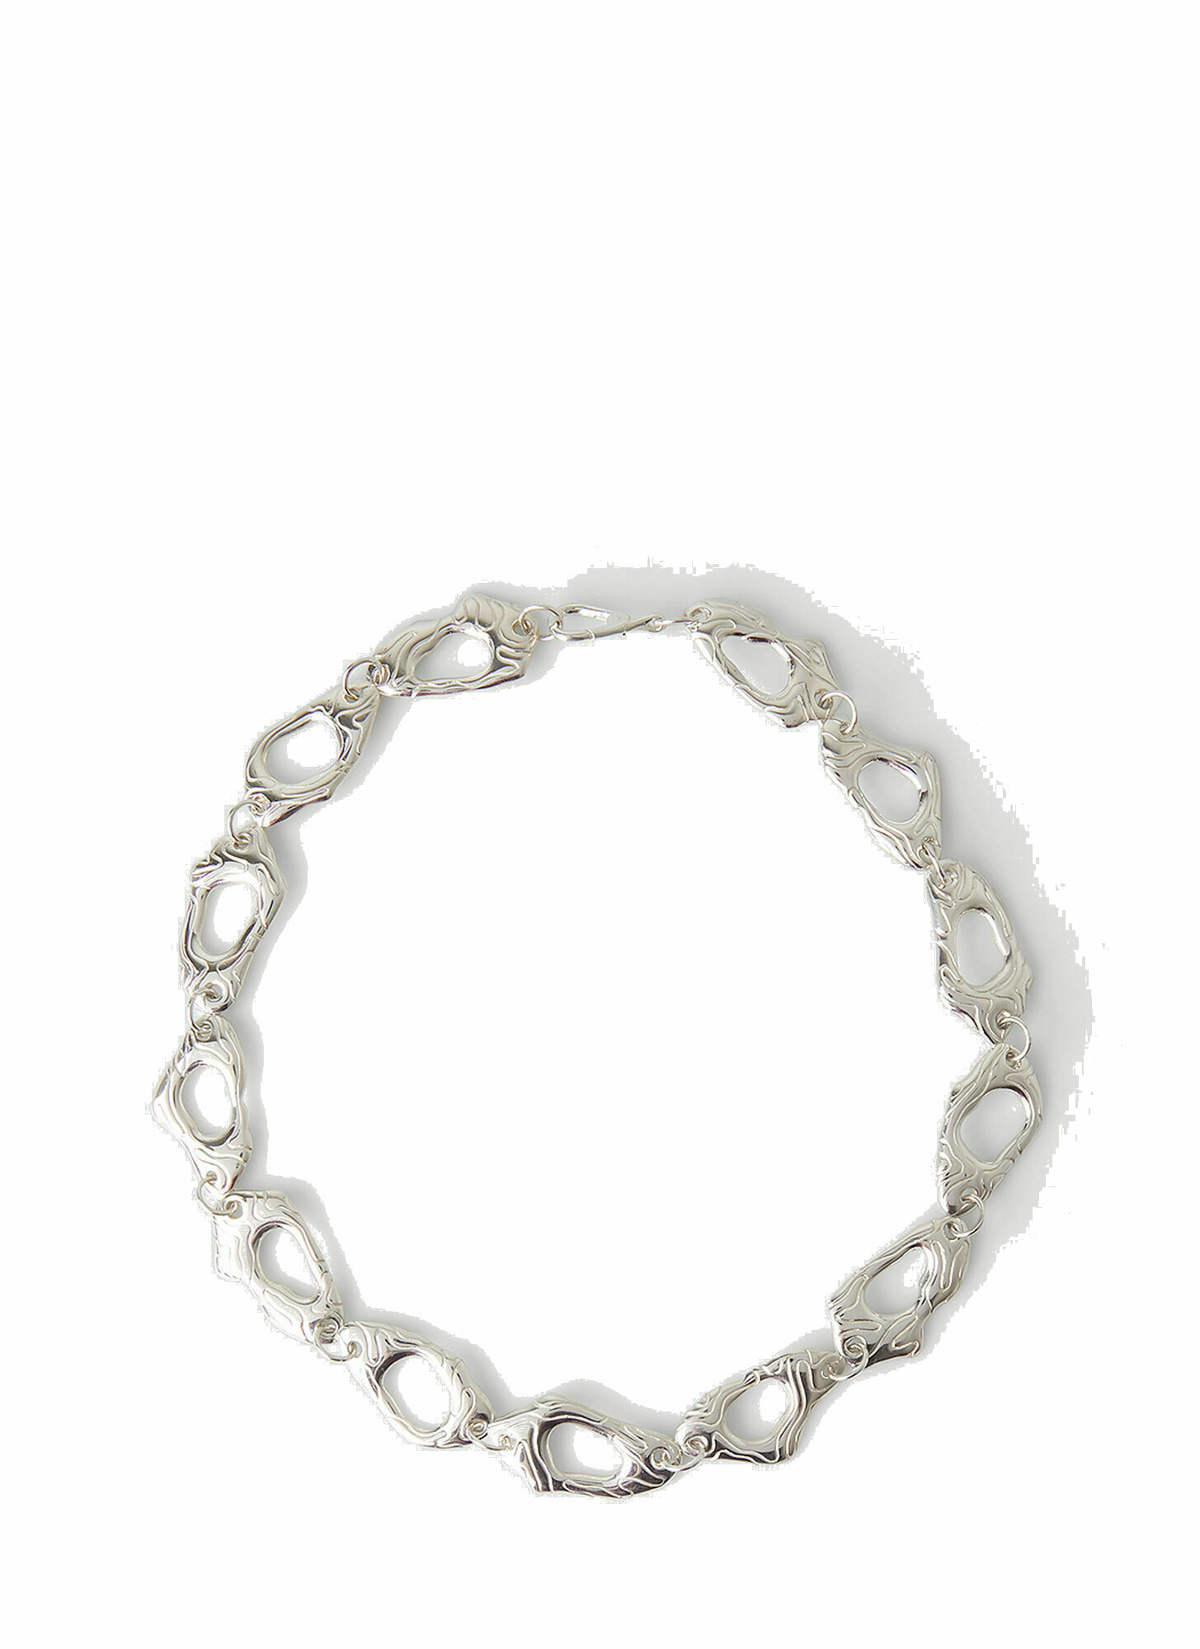 Octi - Island Chain Necklace in Silver